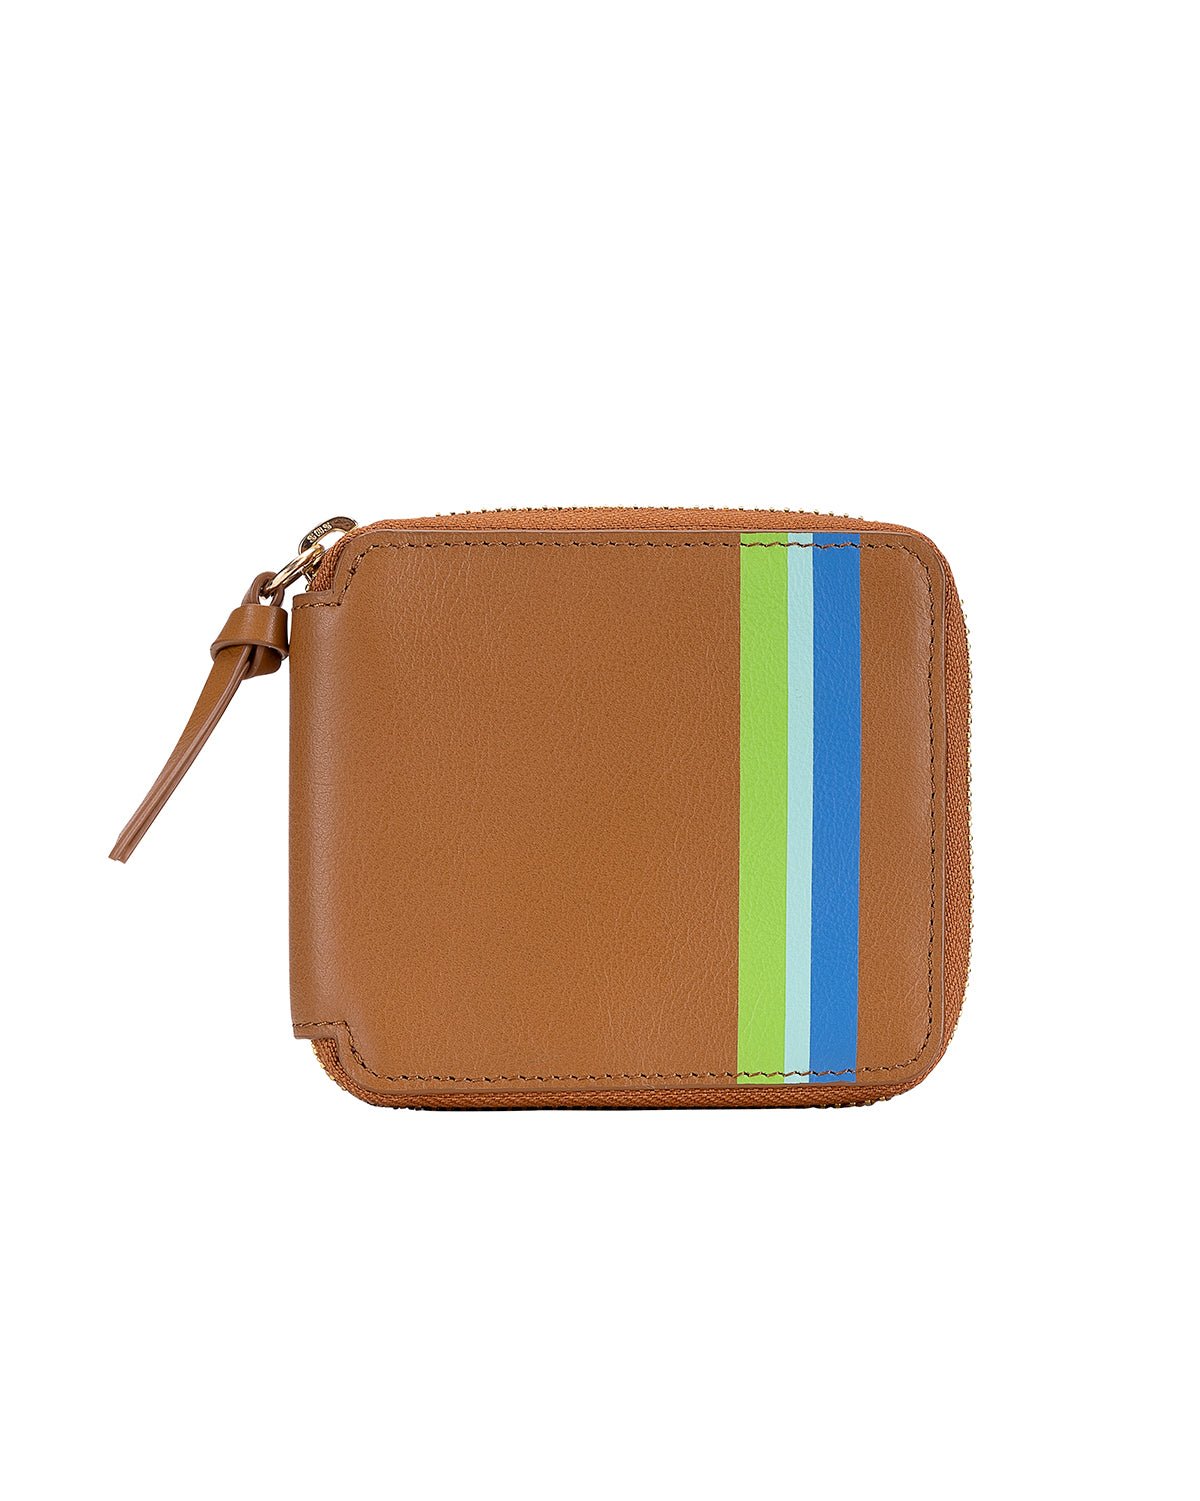 Surface Wallet - Ivy Cove Montecito